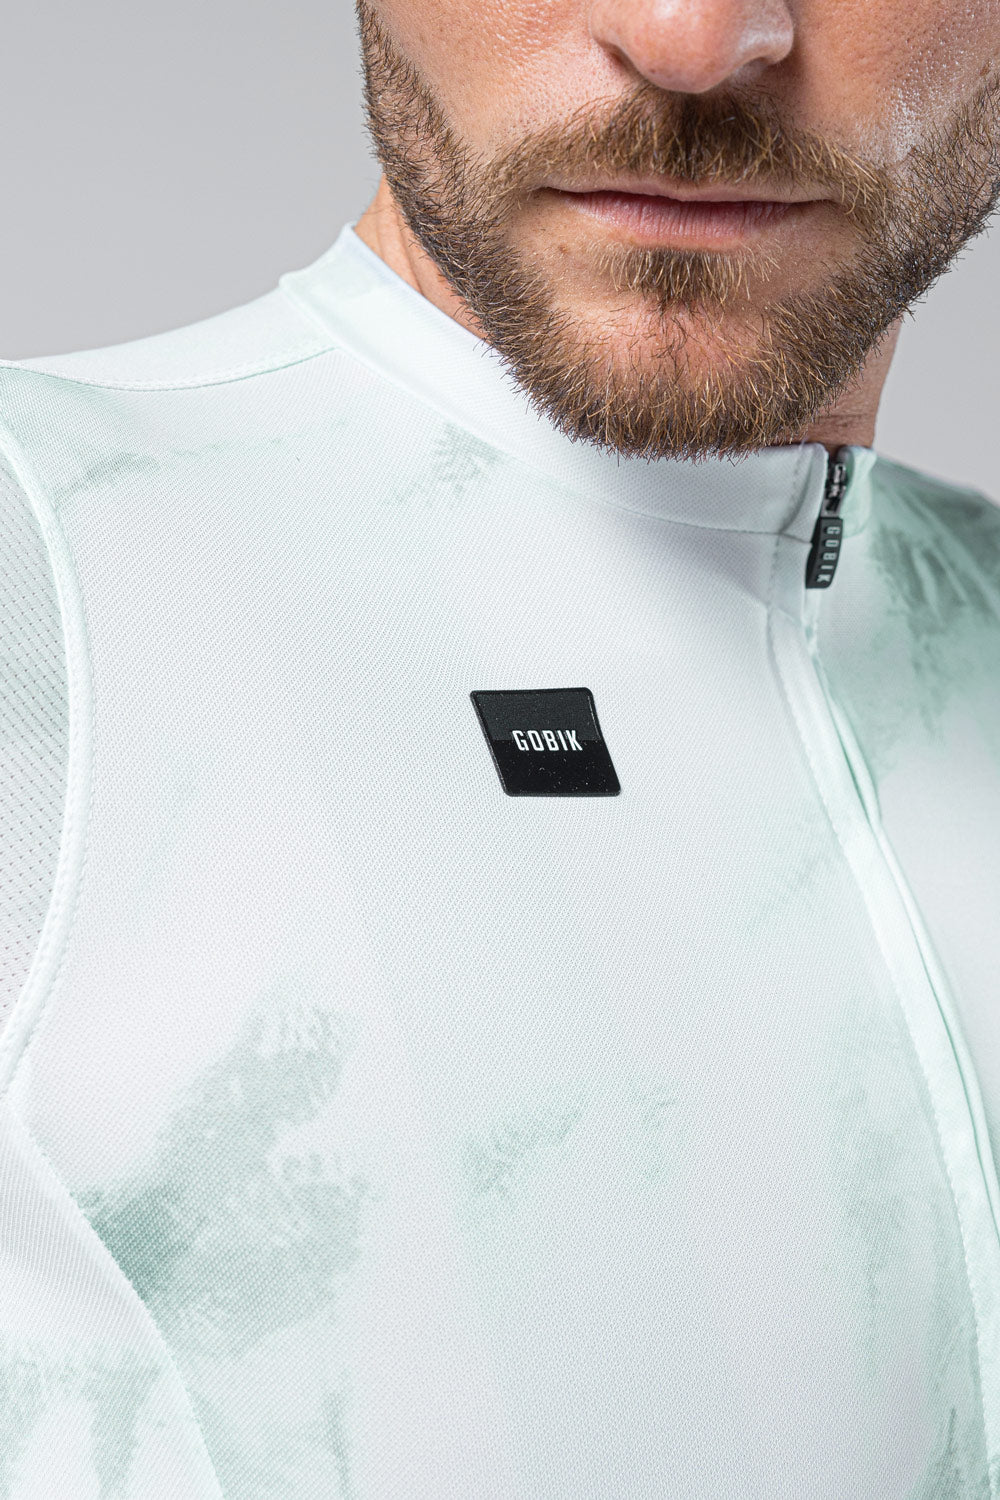 MAILLOT MANCHES COURTES STARK HOMME ICY